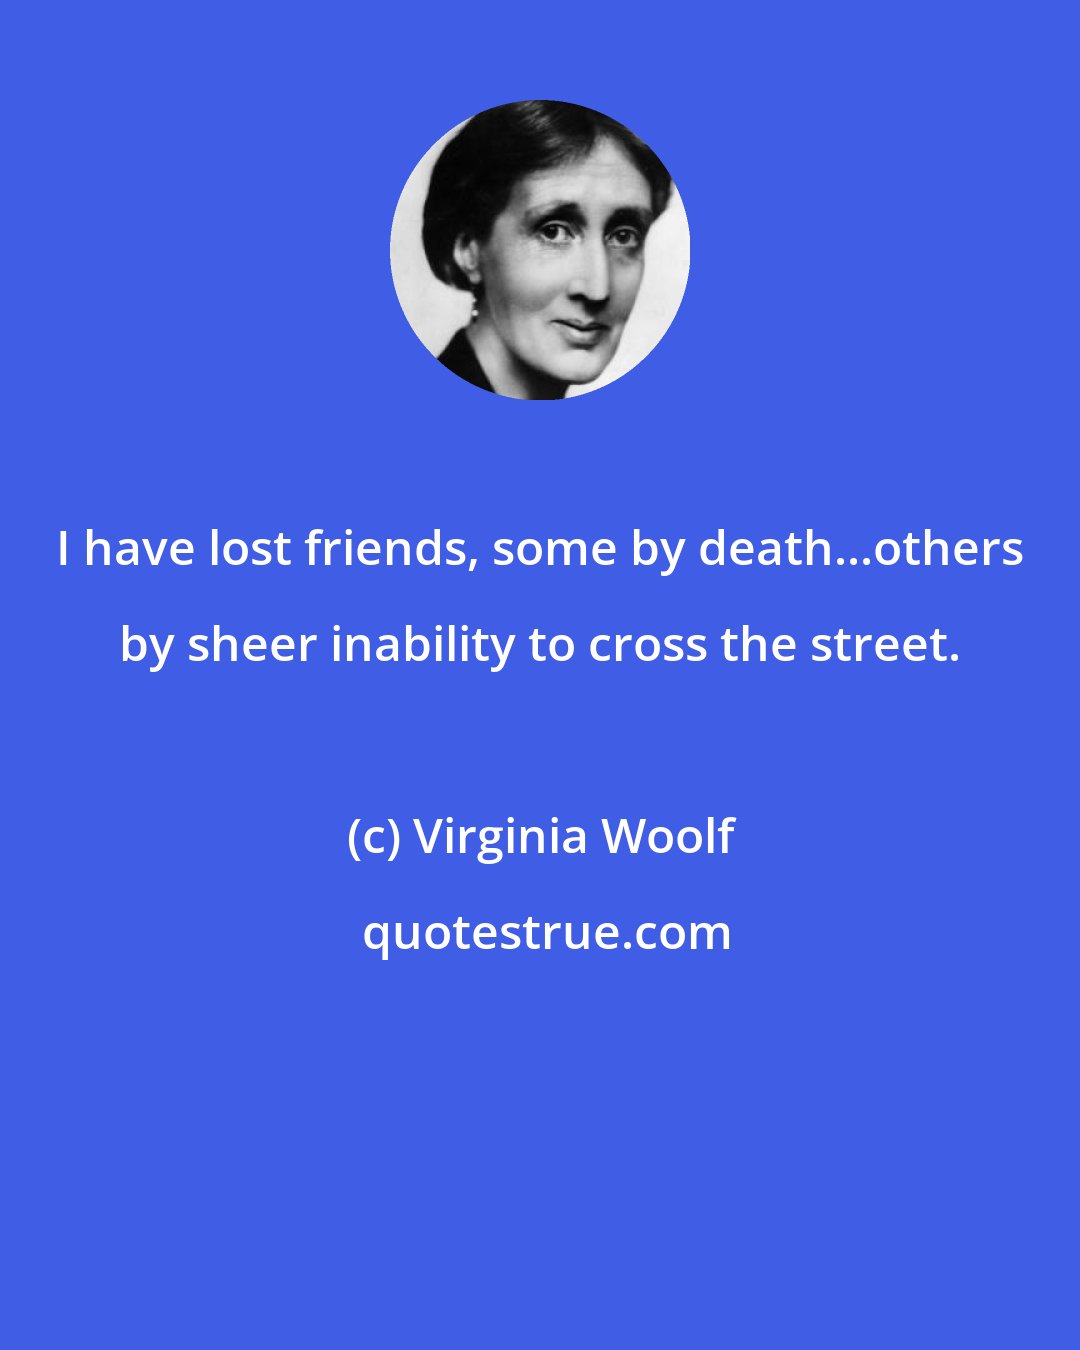 Virginia Woolf: I have lost friends, some by death...others by sheer inability to cross the street.